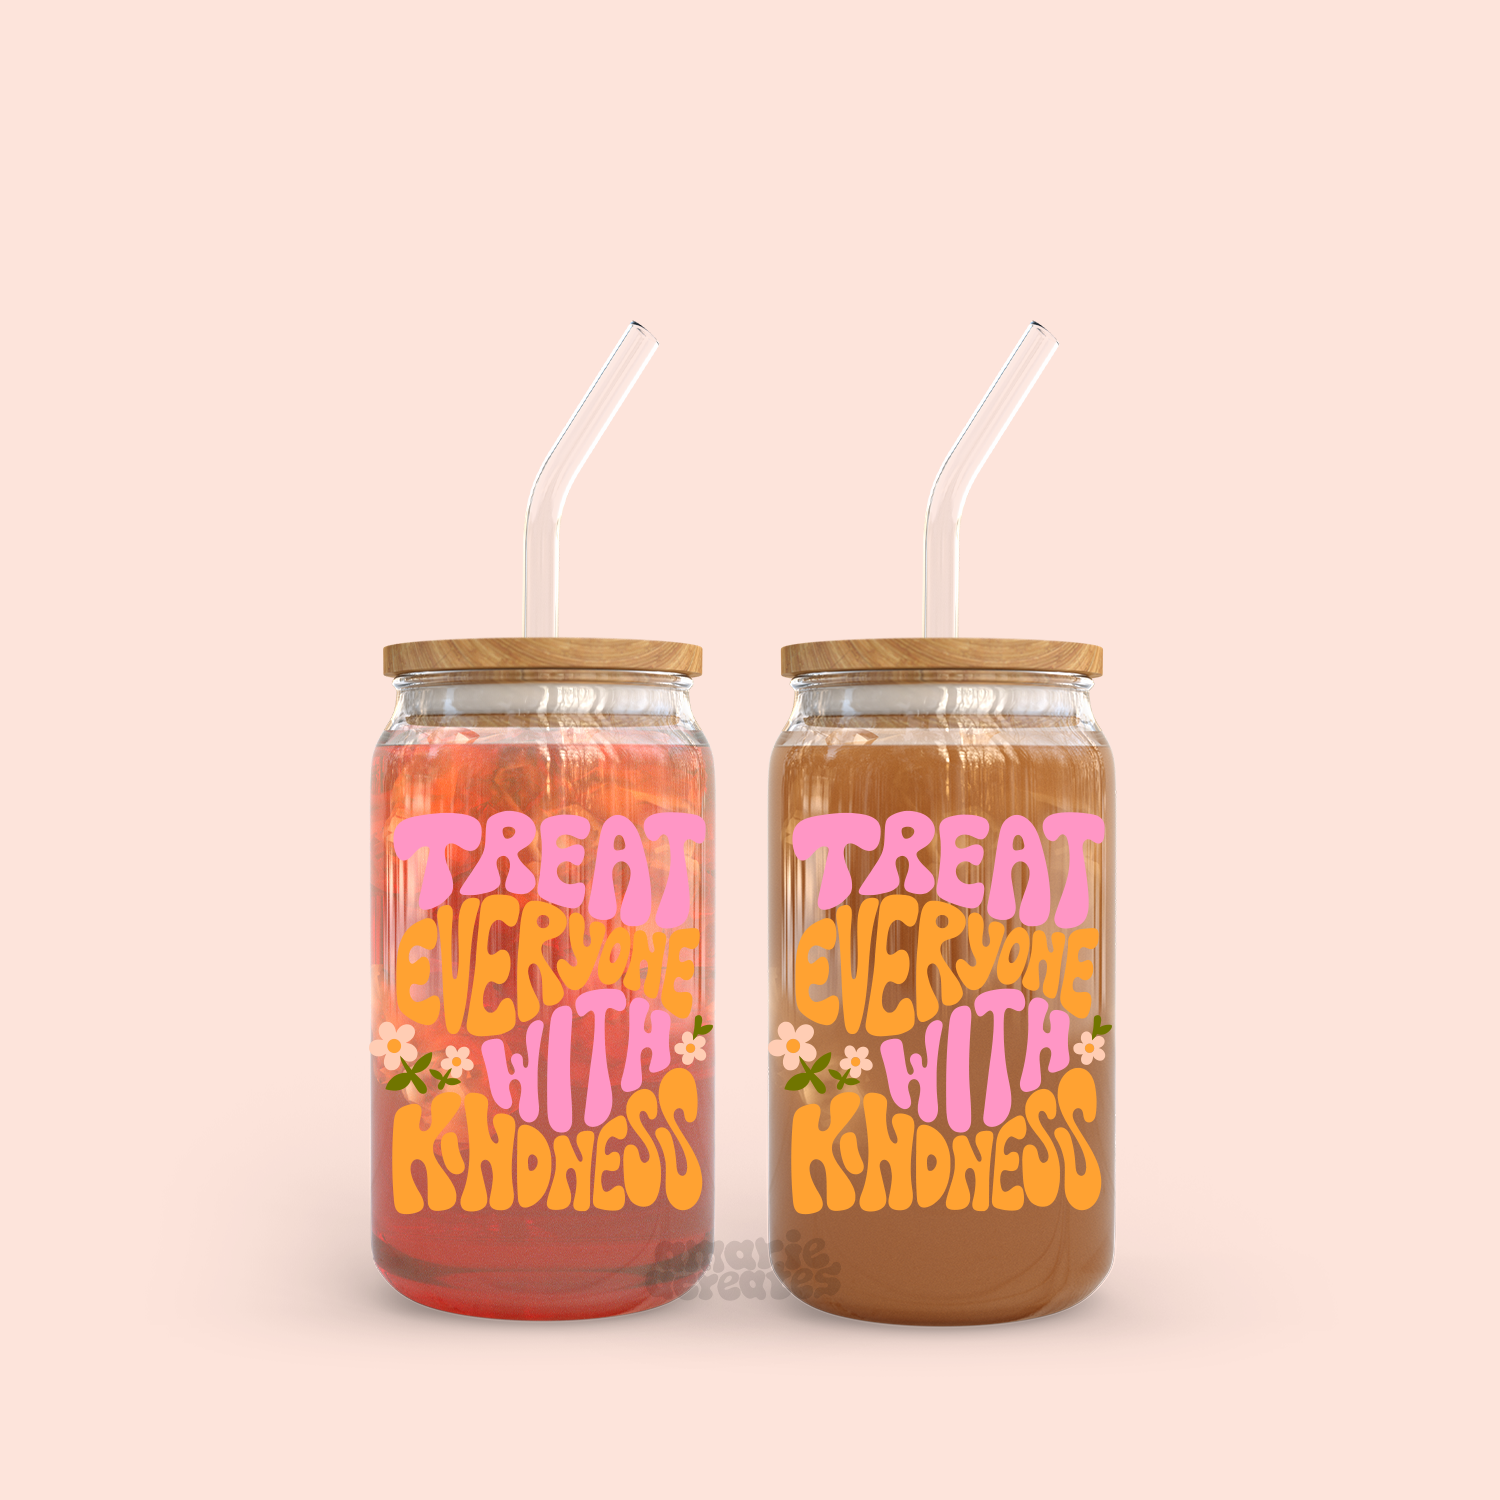 TReat everyone with kindness cup